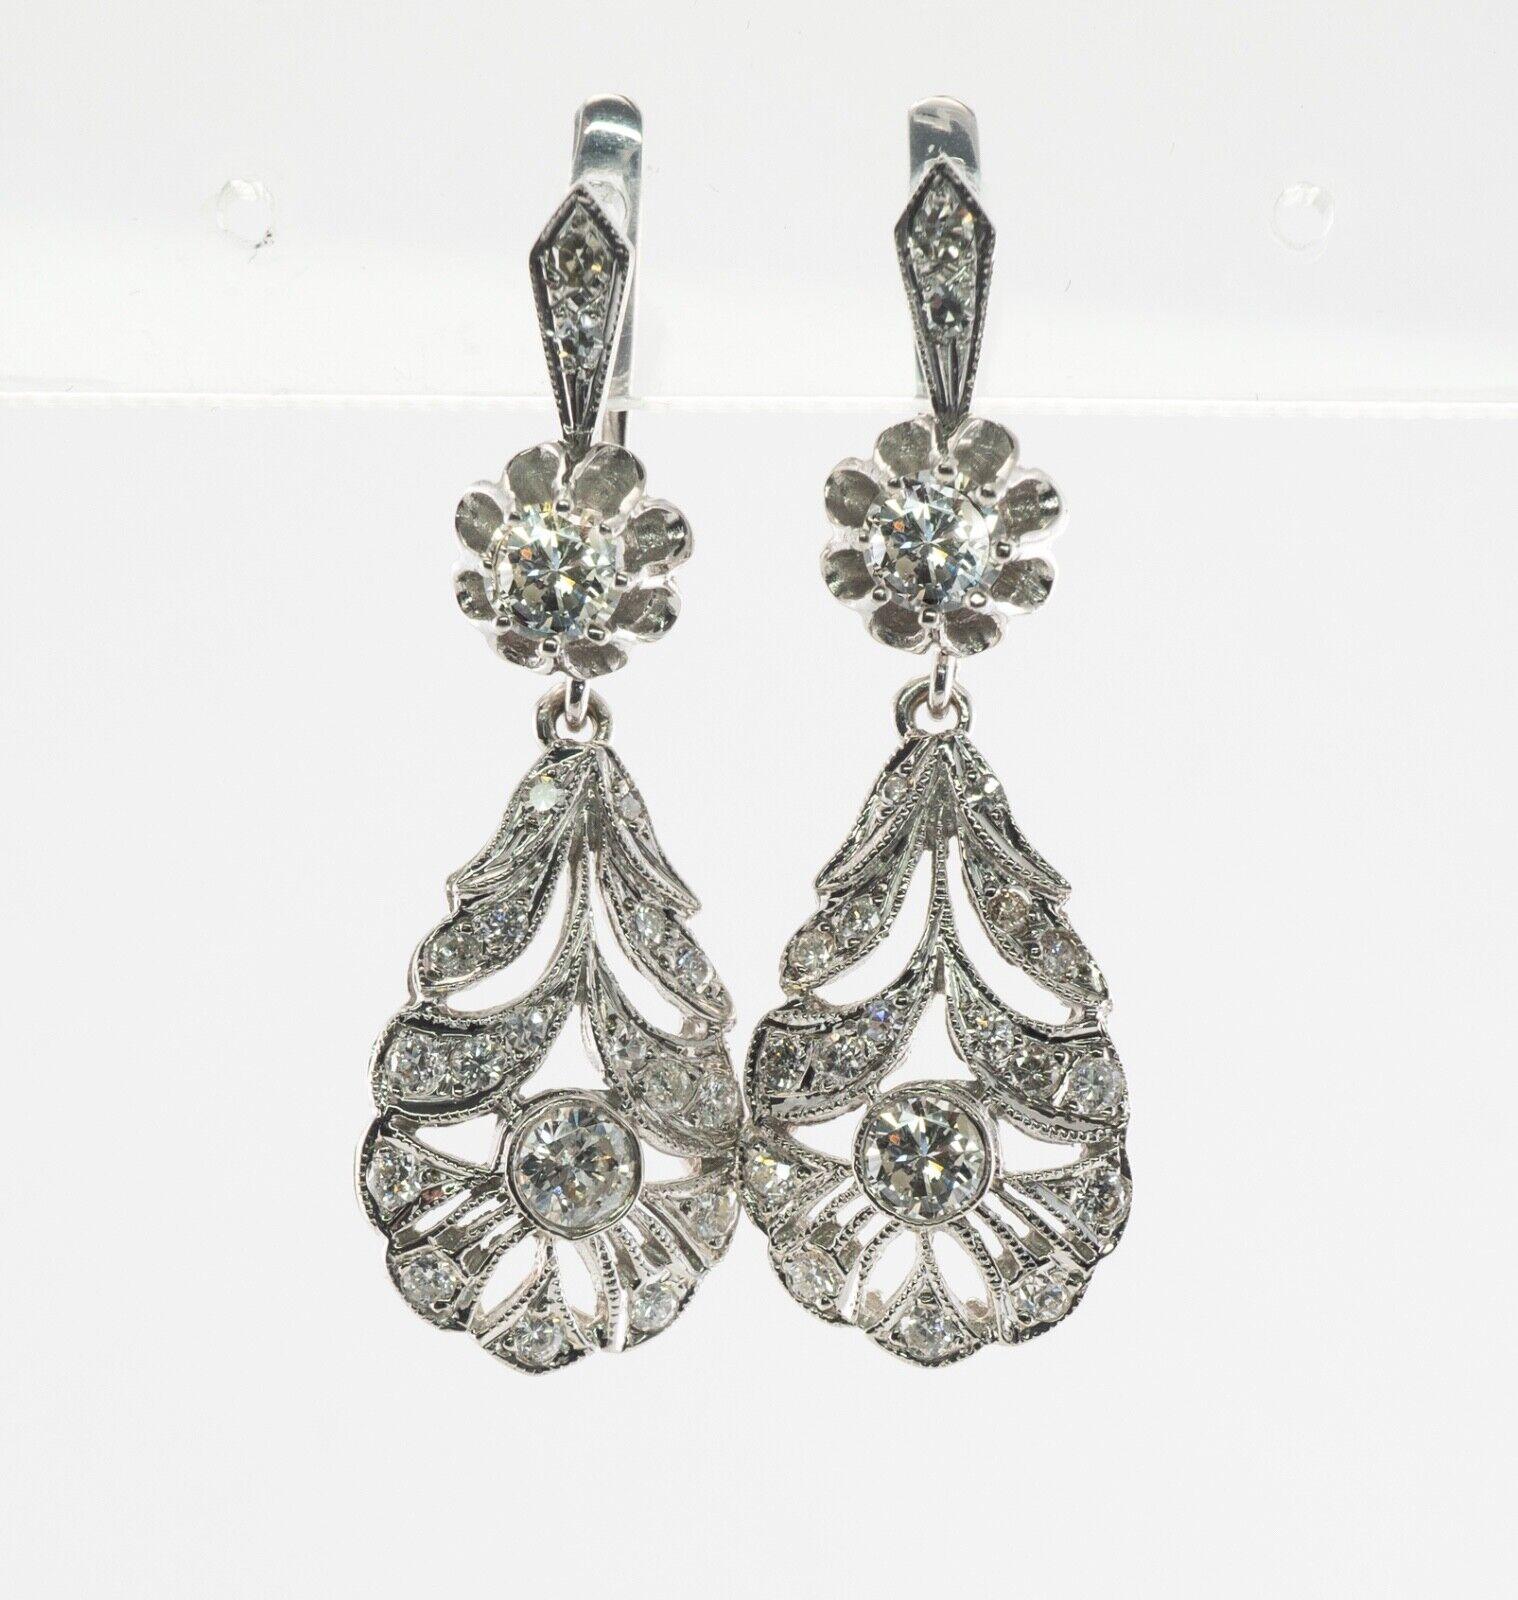 These gorgeous vintage earrings are crafted in solid 14K White Gold and set with natural diamonds. The buttercup setting on the top holds .25 carat diamond. The bezel-set diamond on the bottom is .30 carat. The fully millgrained top is encrusted